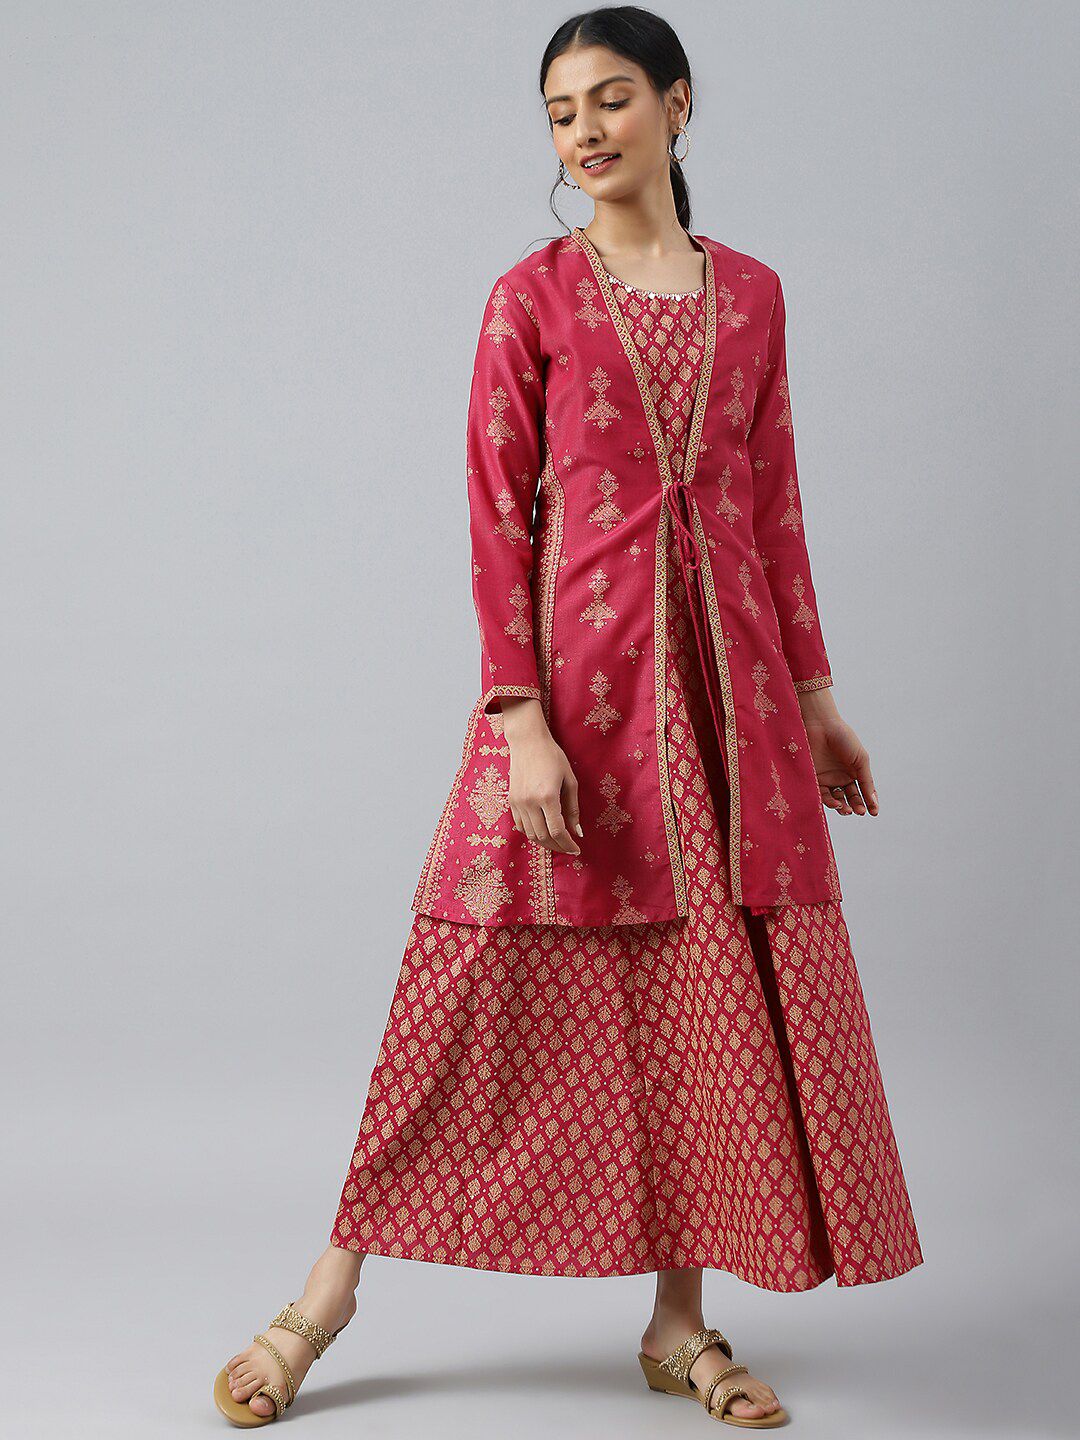 W Pink Ethnic Motifs Chiffon Ethnic Maxi Dress With Tie-Up Waist Coat Price in India